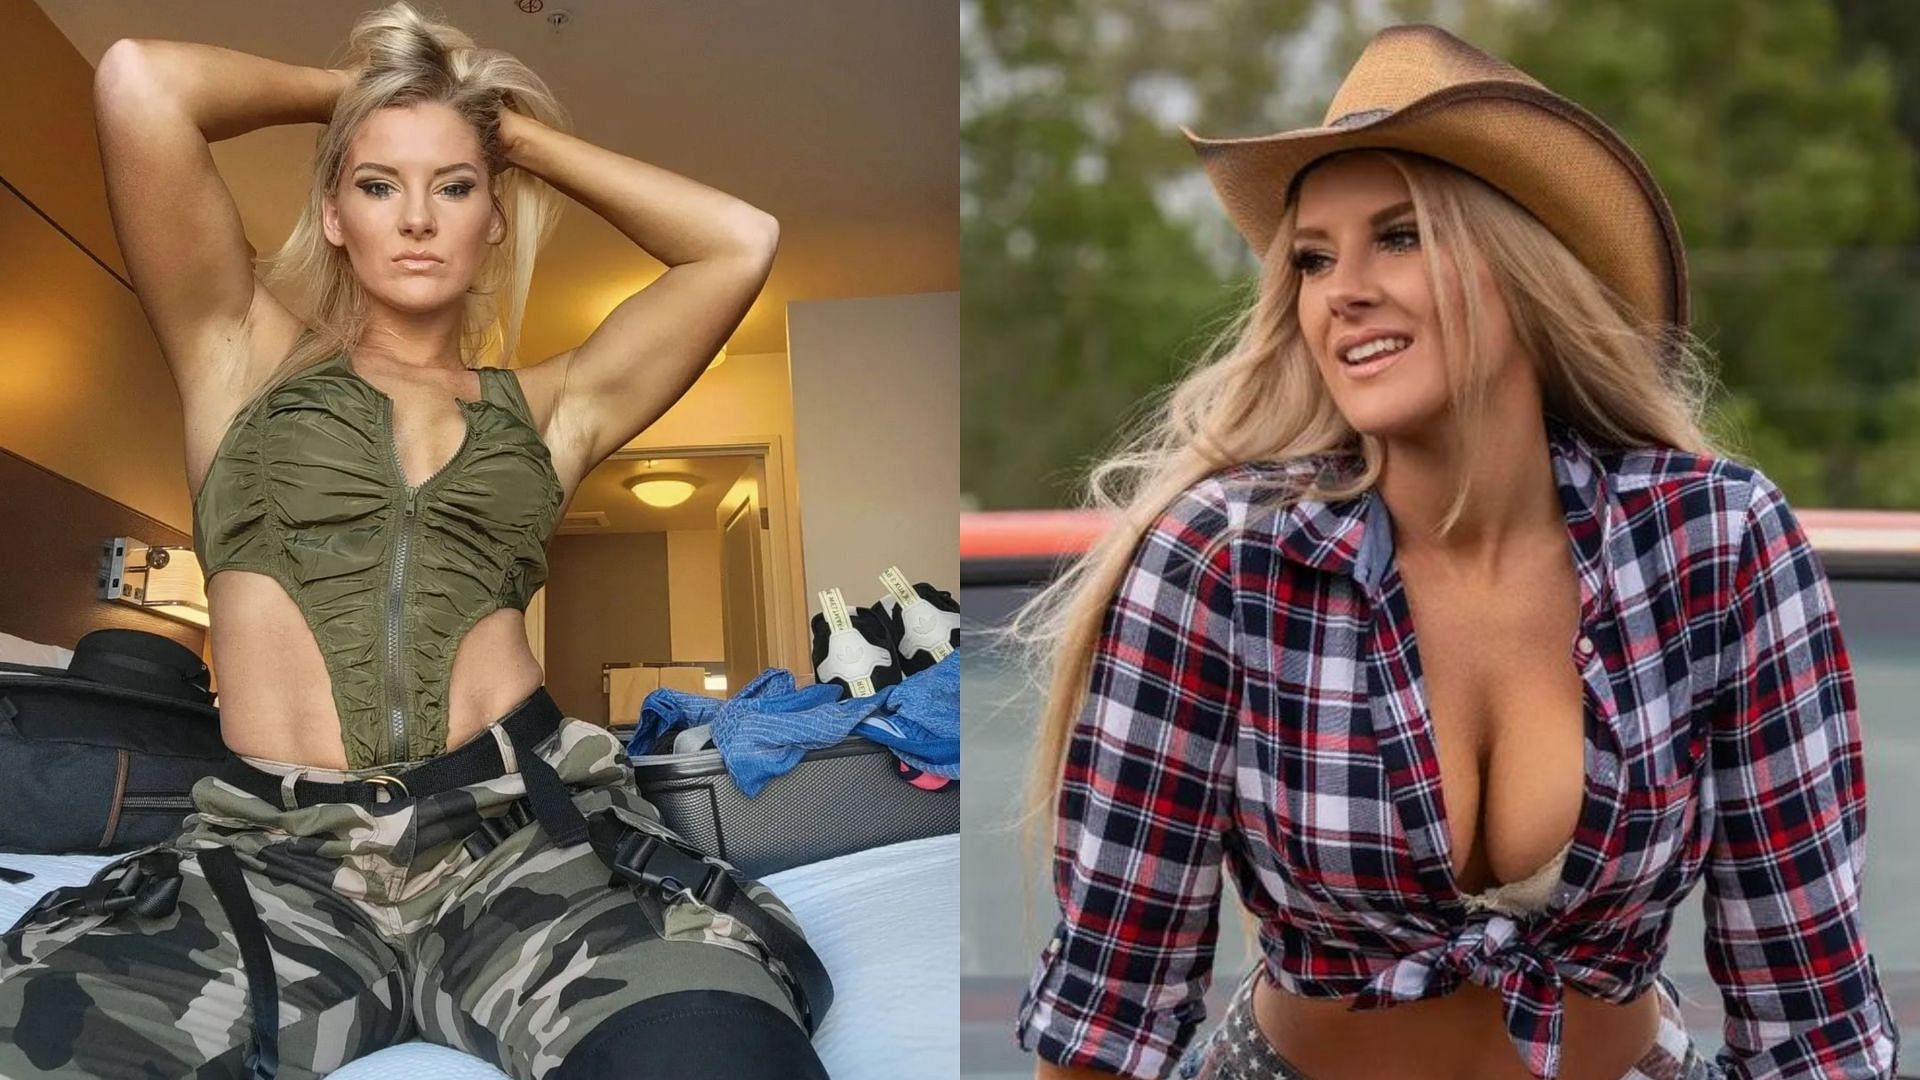 Former WWE SmackDown star Lacey Evans